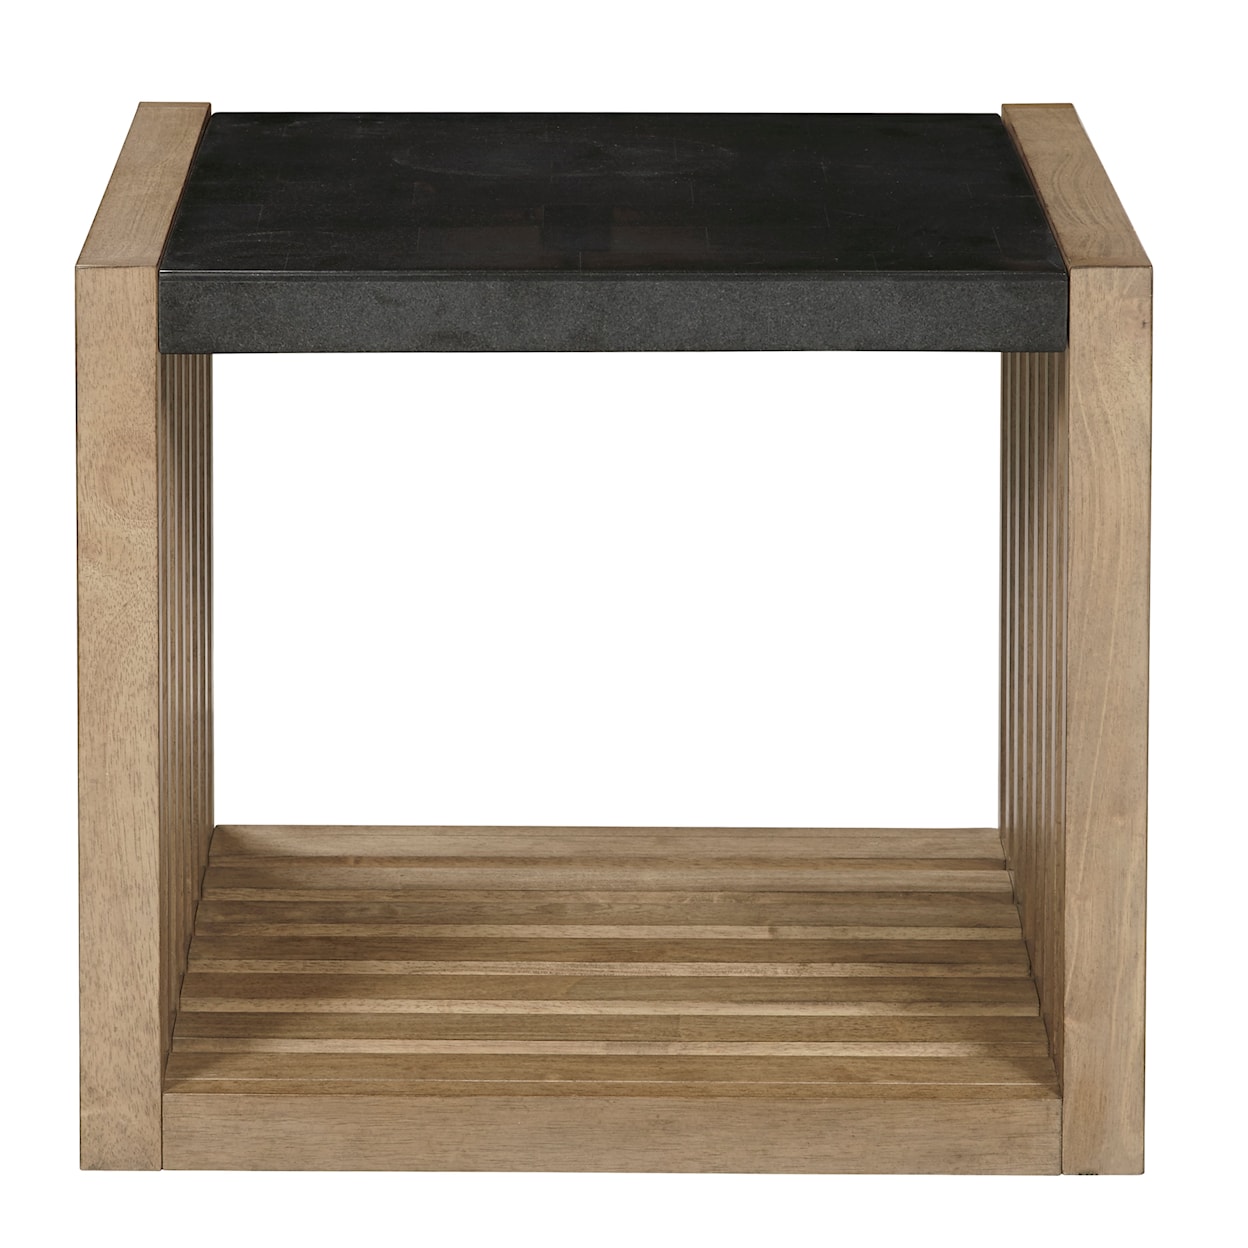 Drew & Jonathan Home Catalina Catalina Stone Top End Table